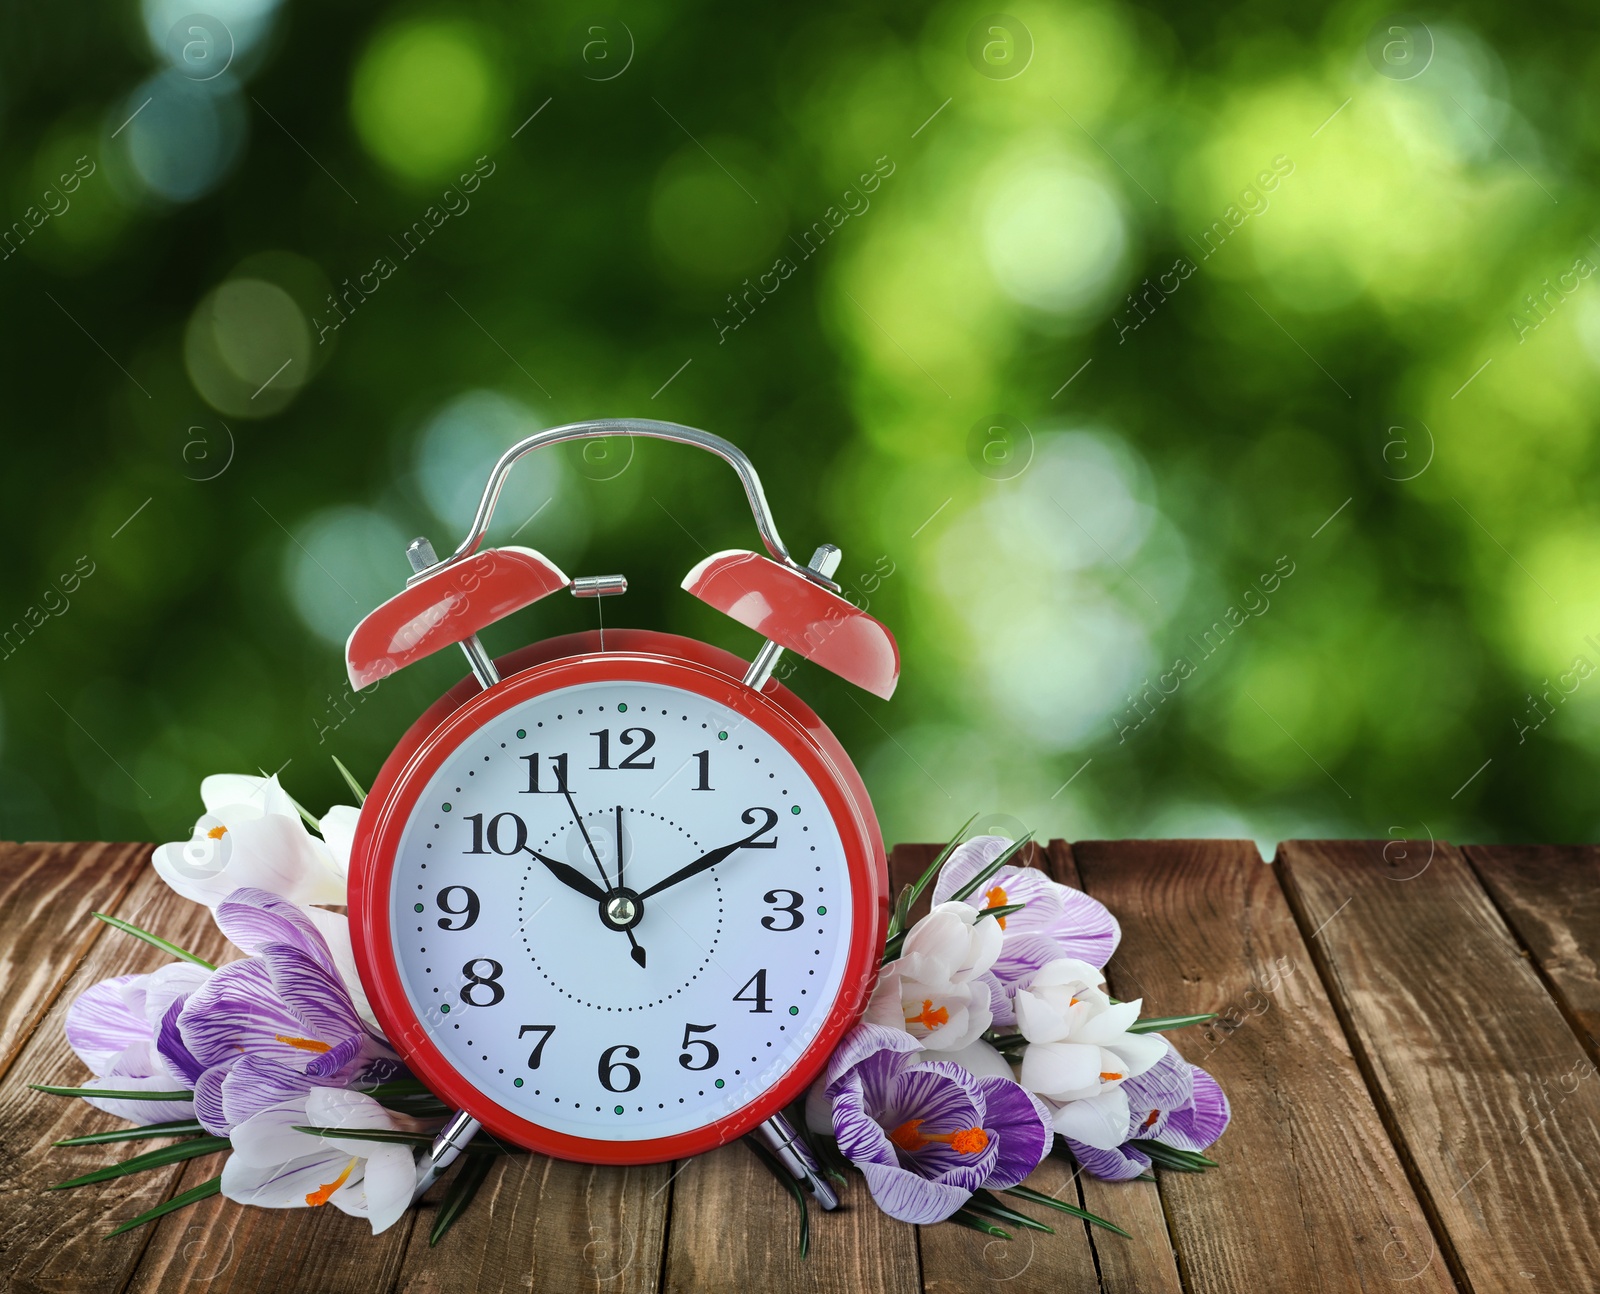 Image of Alarm clock and spring flowers on wooden table. Time change 